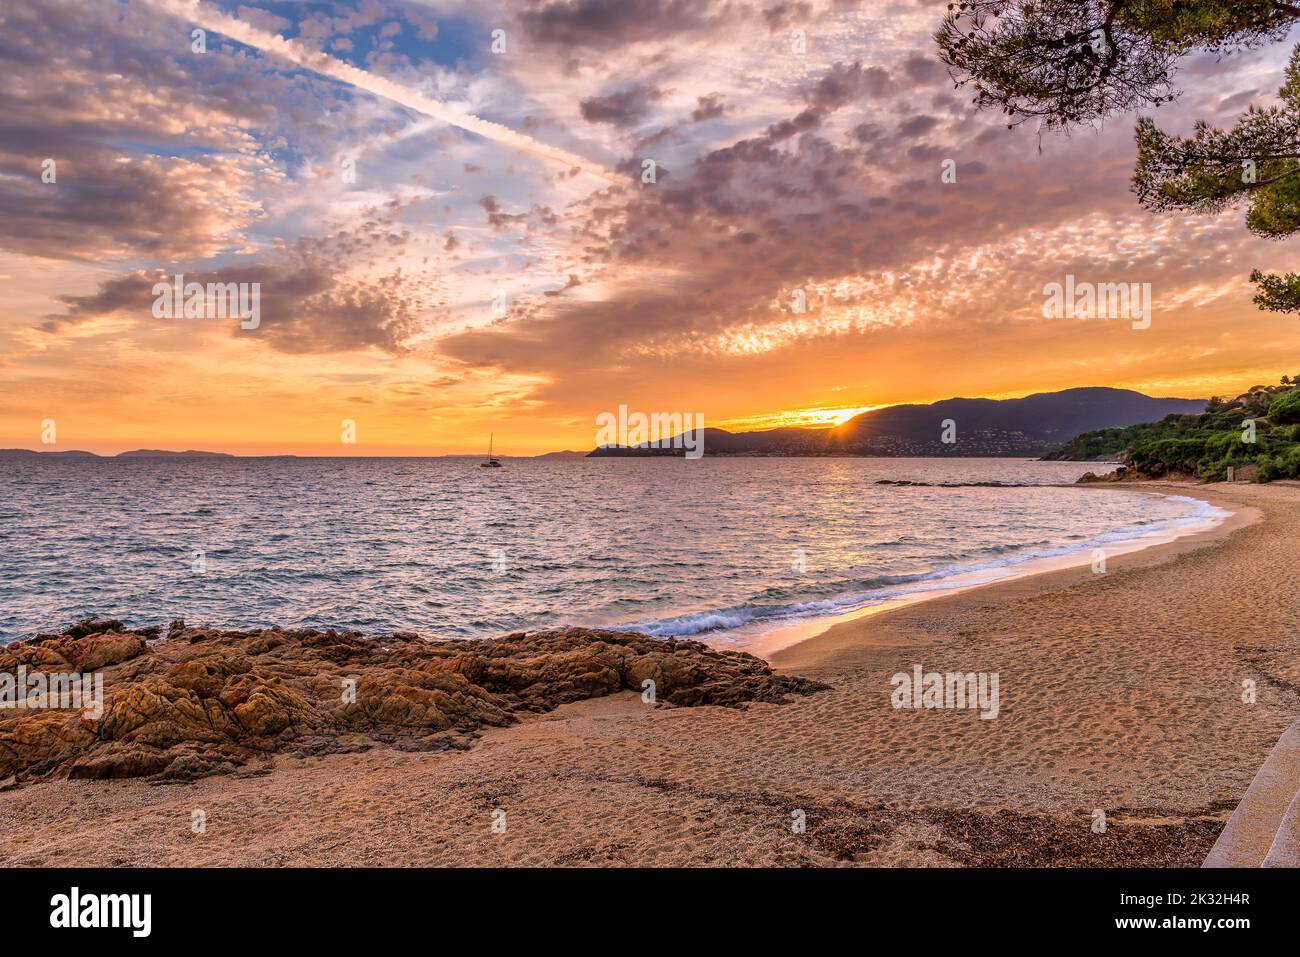 Scenic view of Gigaro beach in Saint Tropez bay area against dramatic sky at sunset Stock Photo